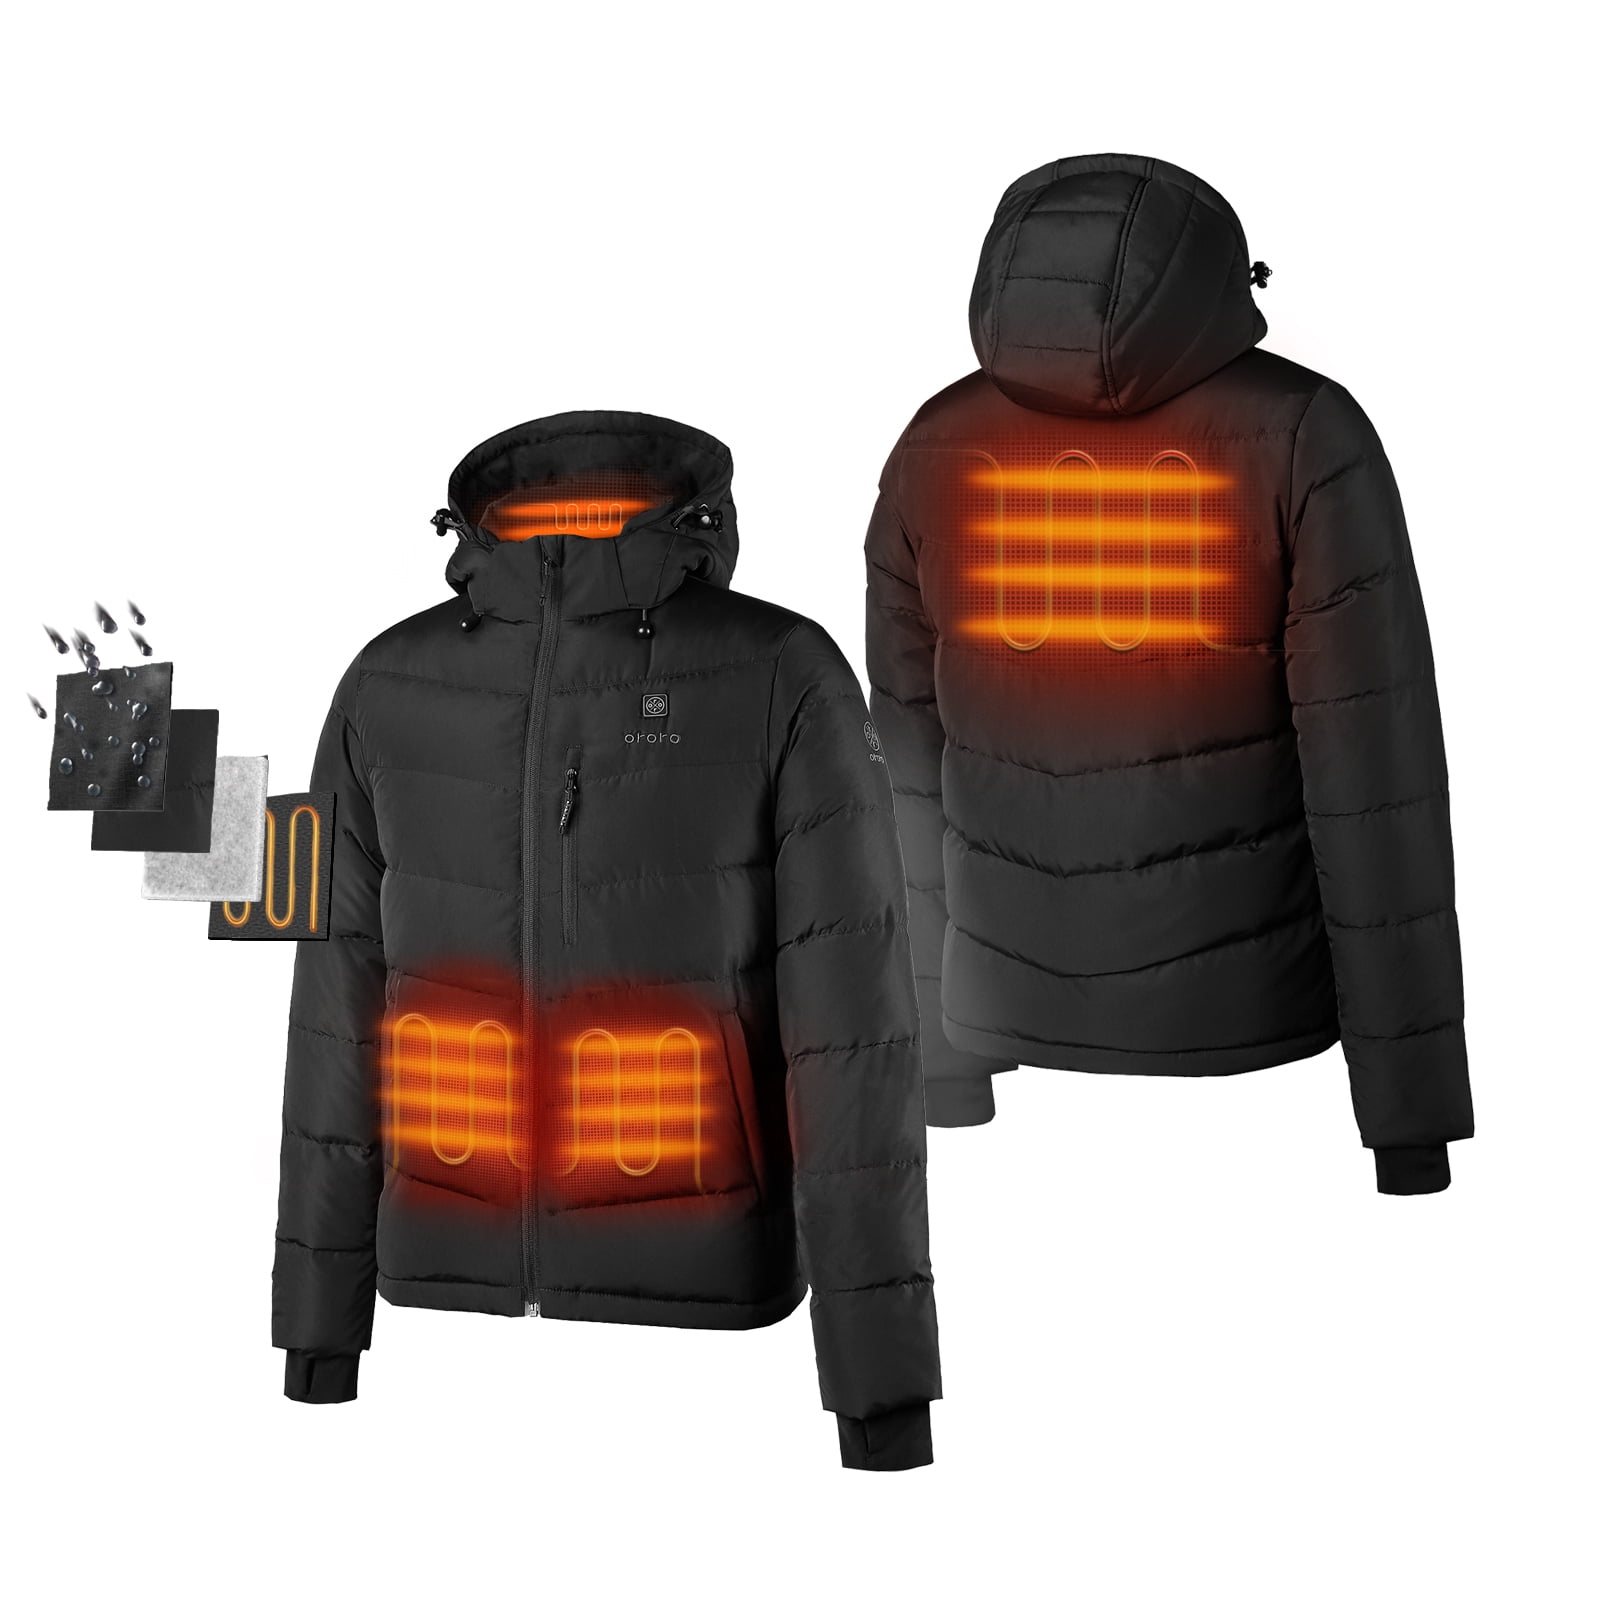 ORORO 2021 Mens Heated Jacket with Heated Collar and 90% Down Insulation Battery Included